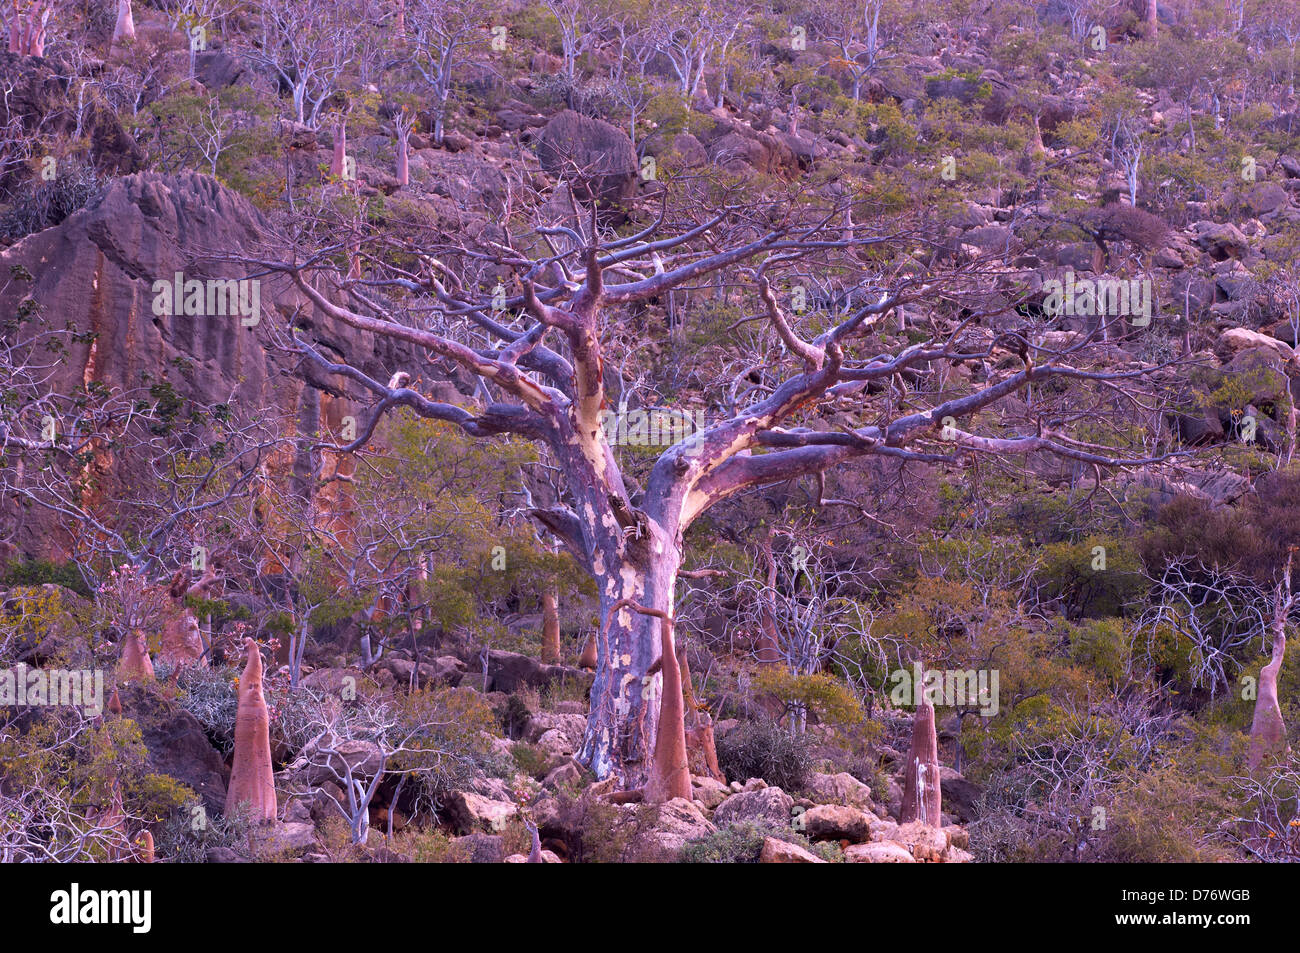 A Mopopaja tree surrounded by endemic bottle trees on the island of Socotra Stock Photo